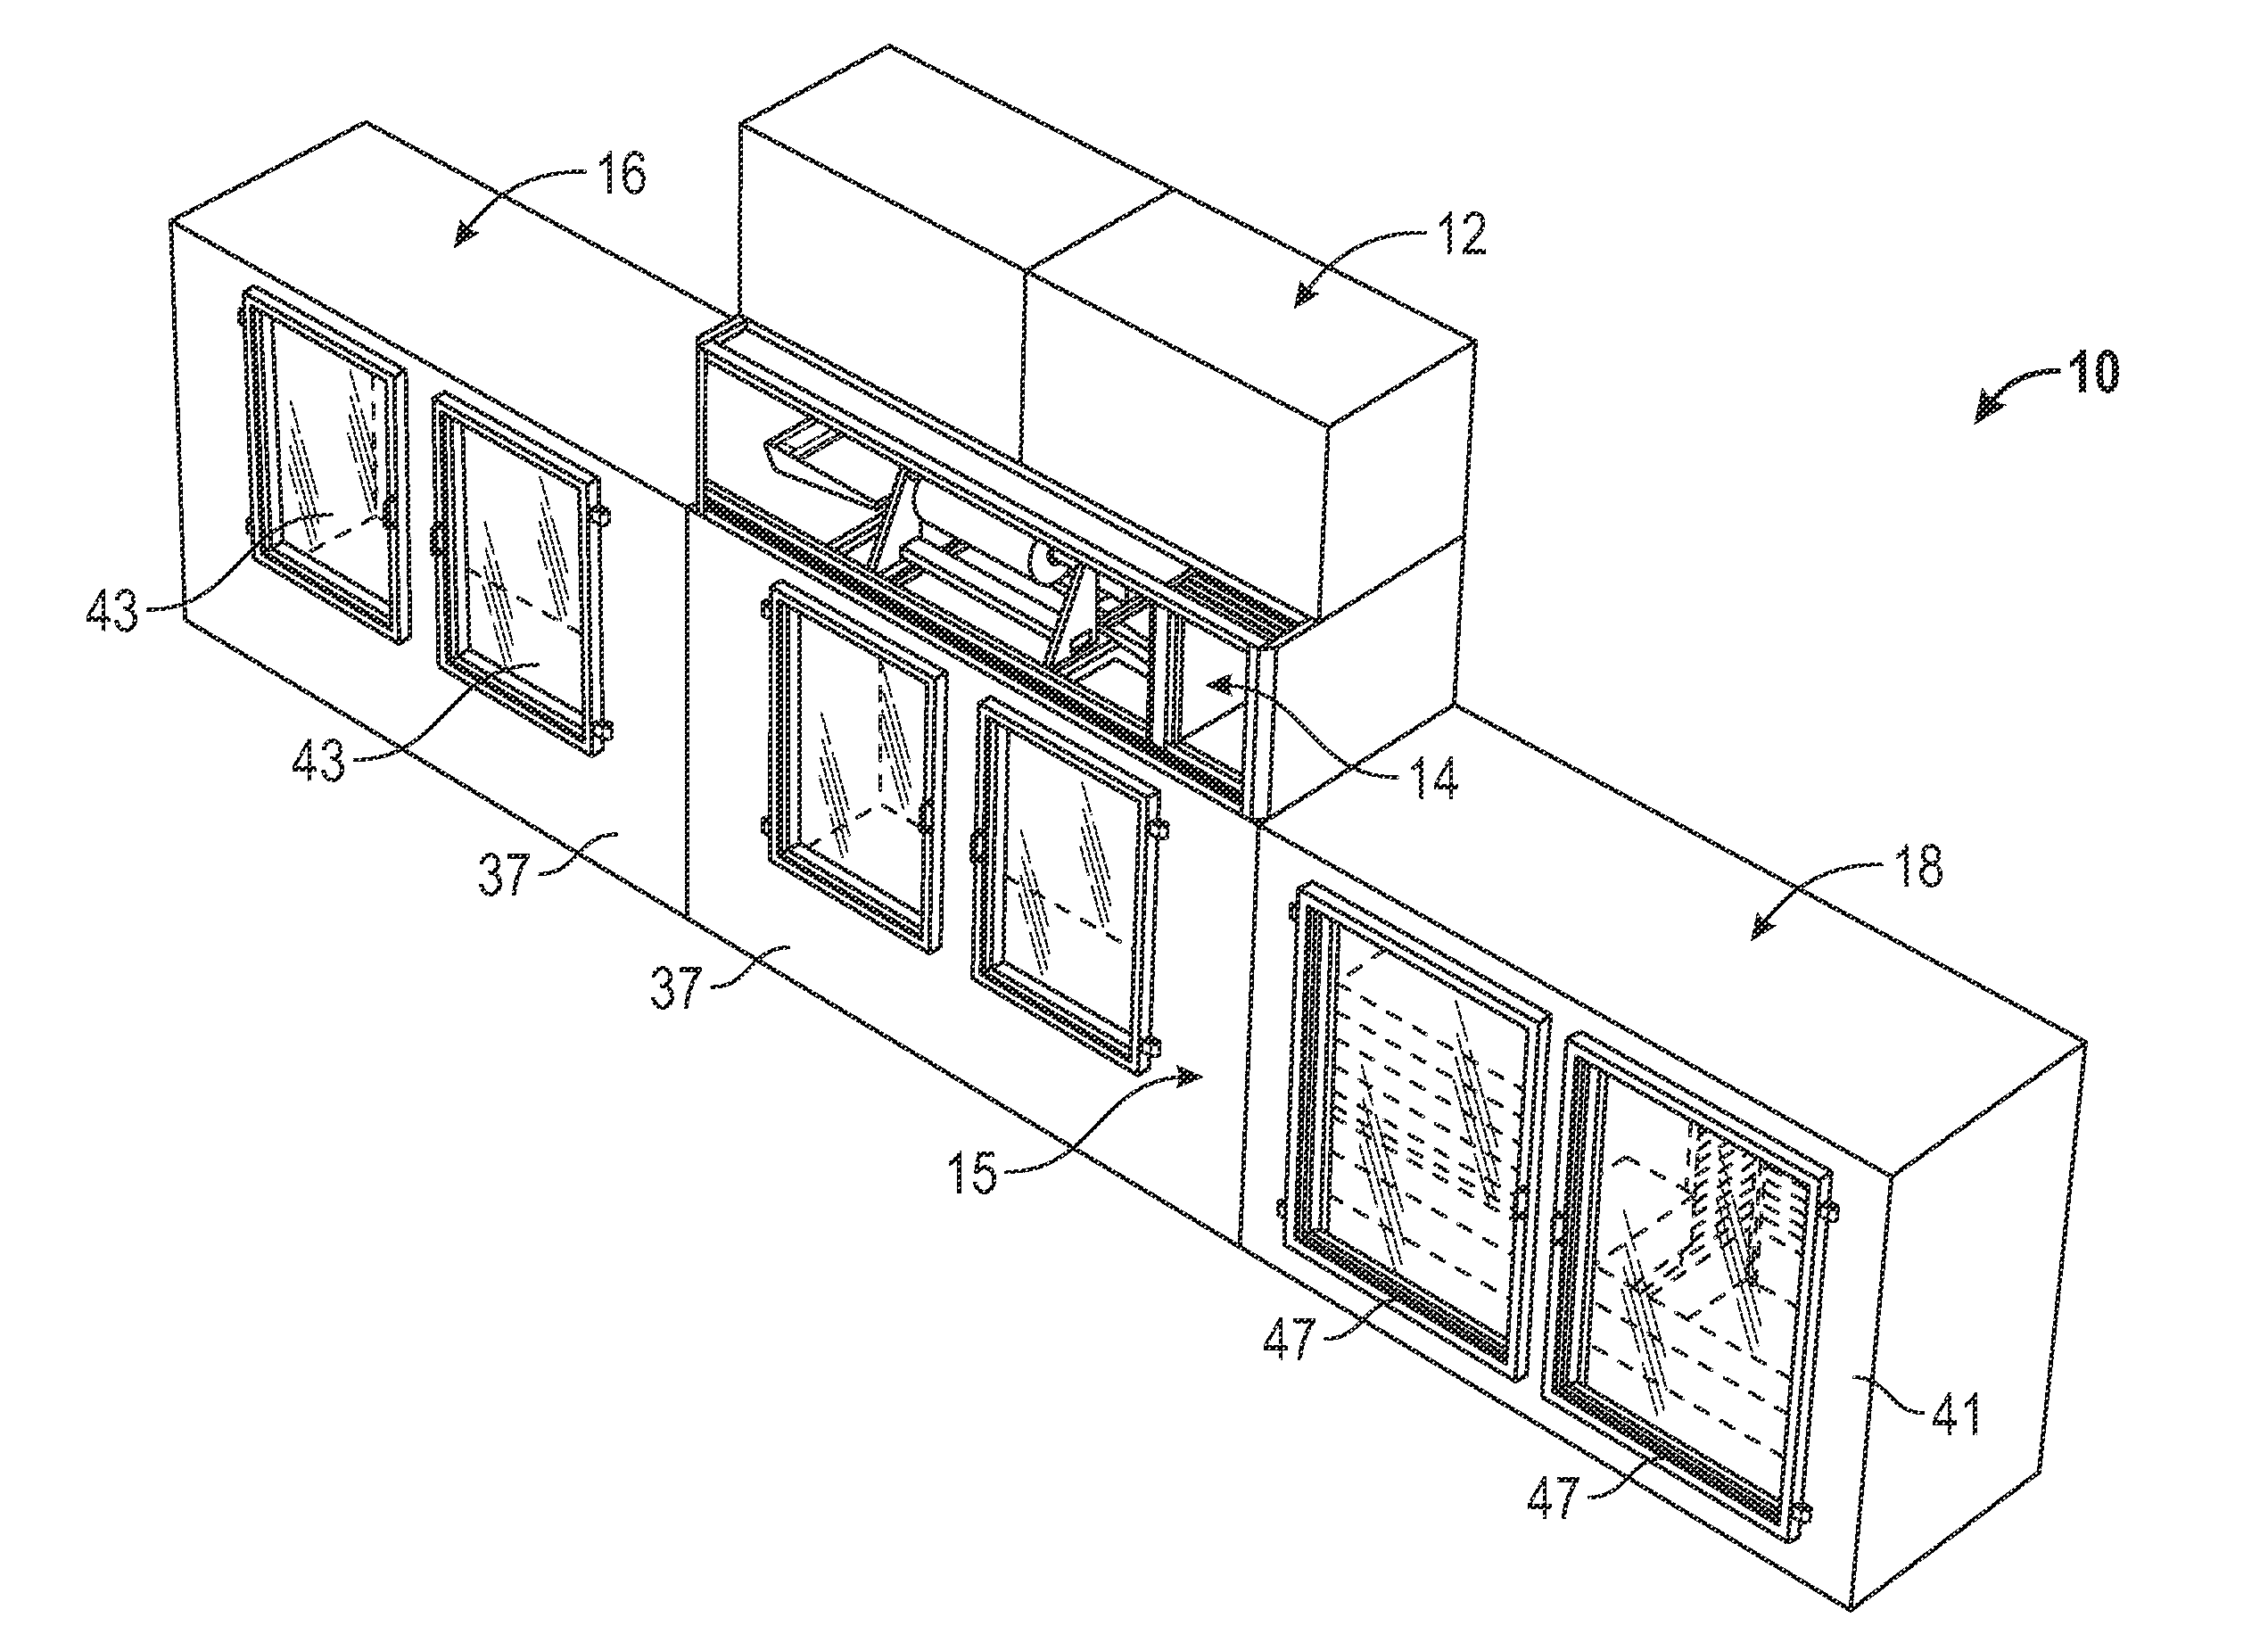 Method and apparatus for distributing and storing serially produced articles in multiple storage units